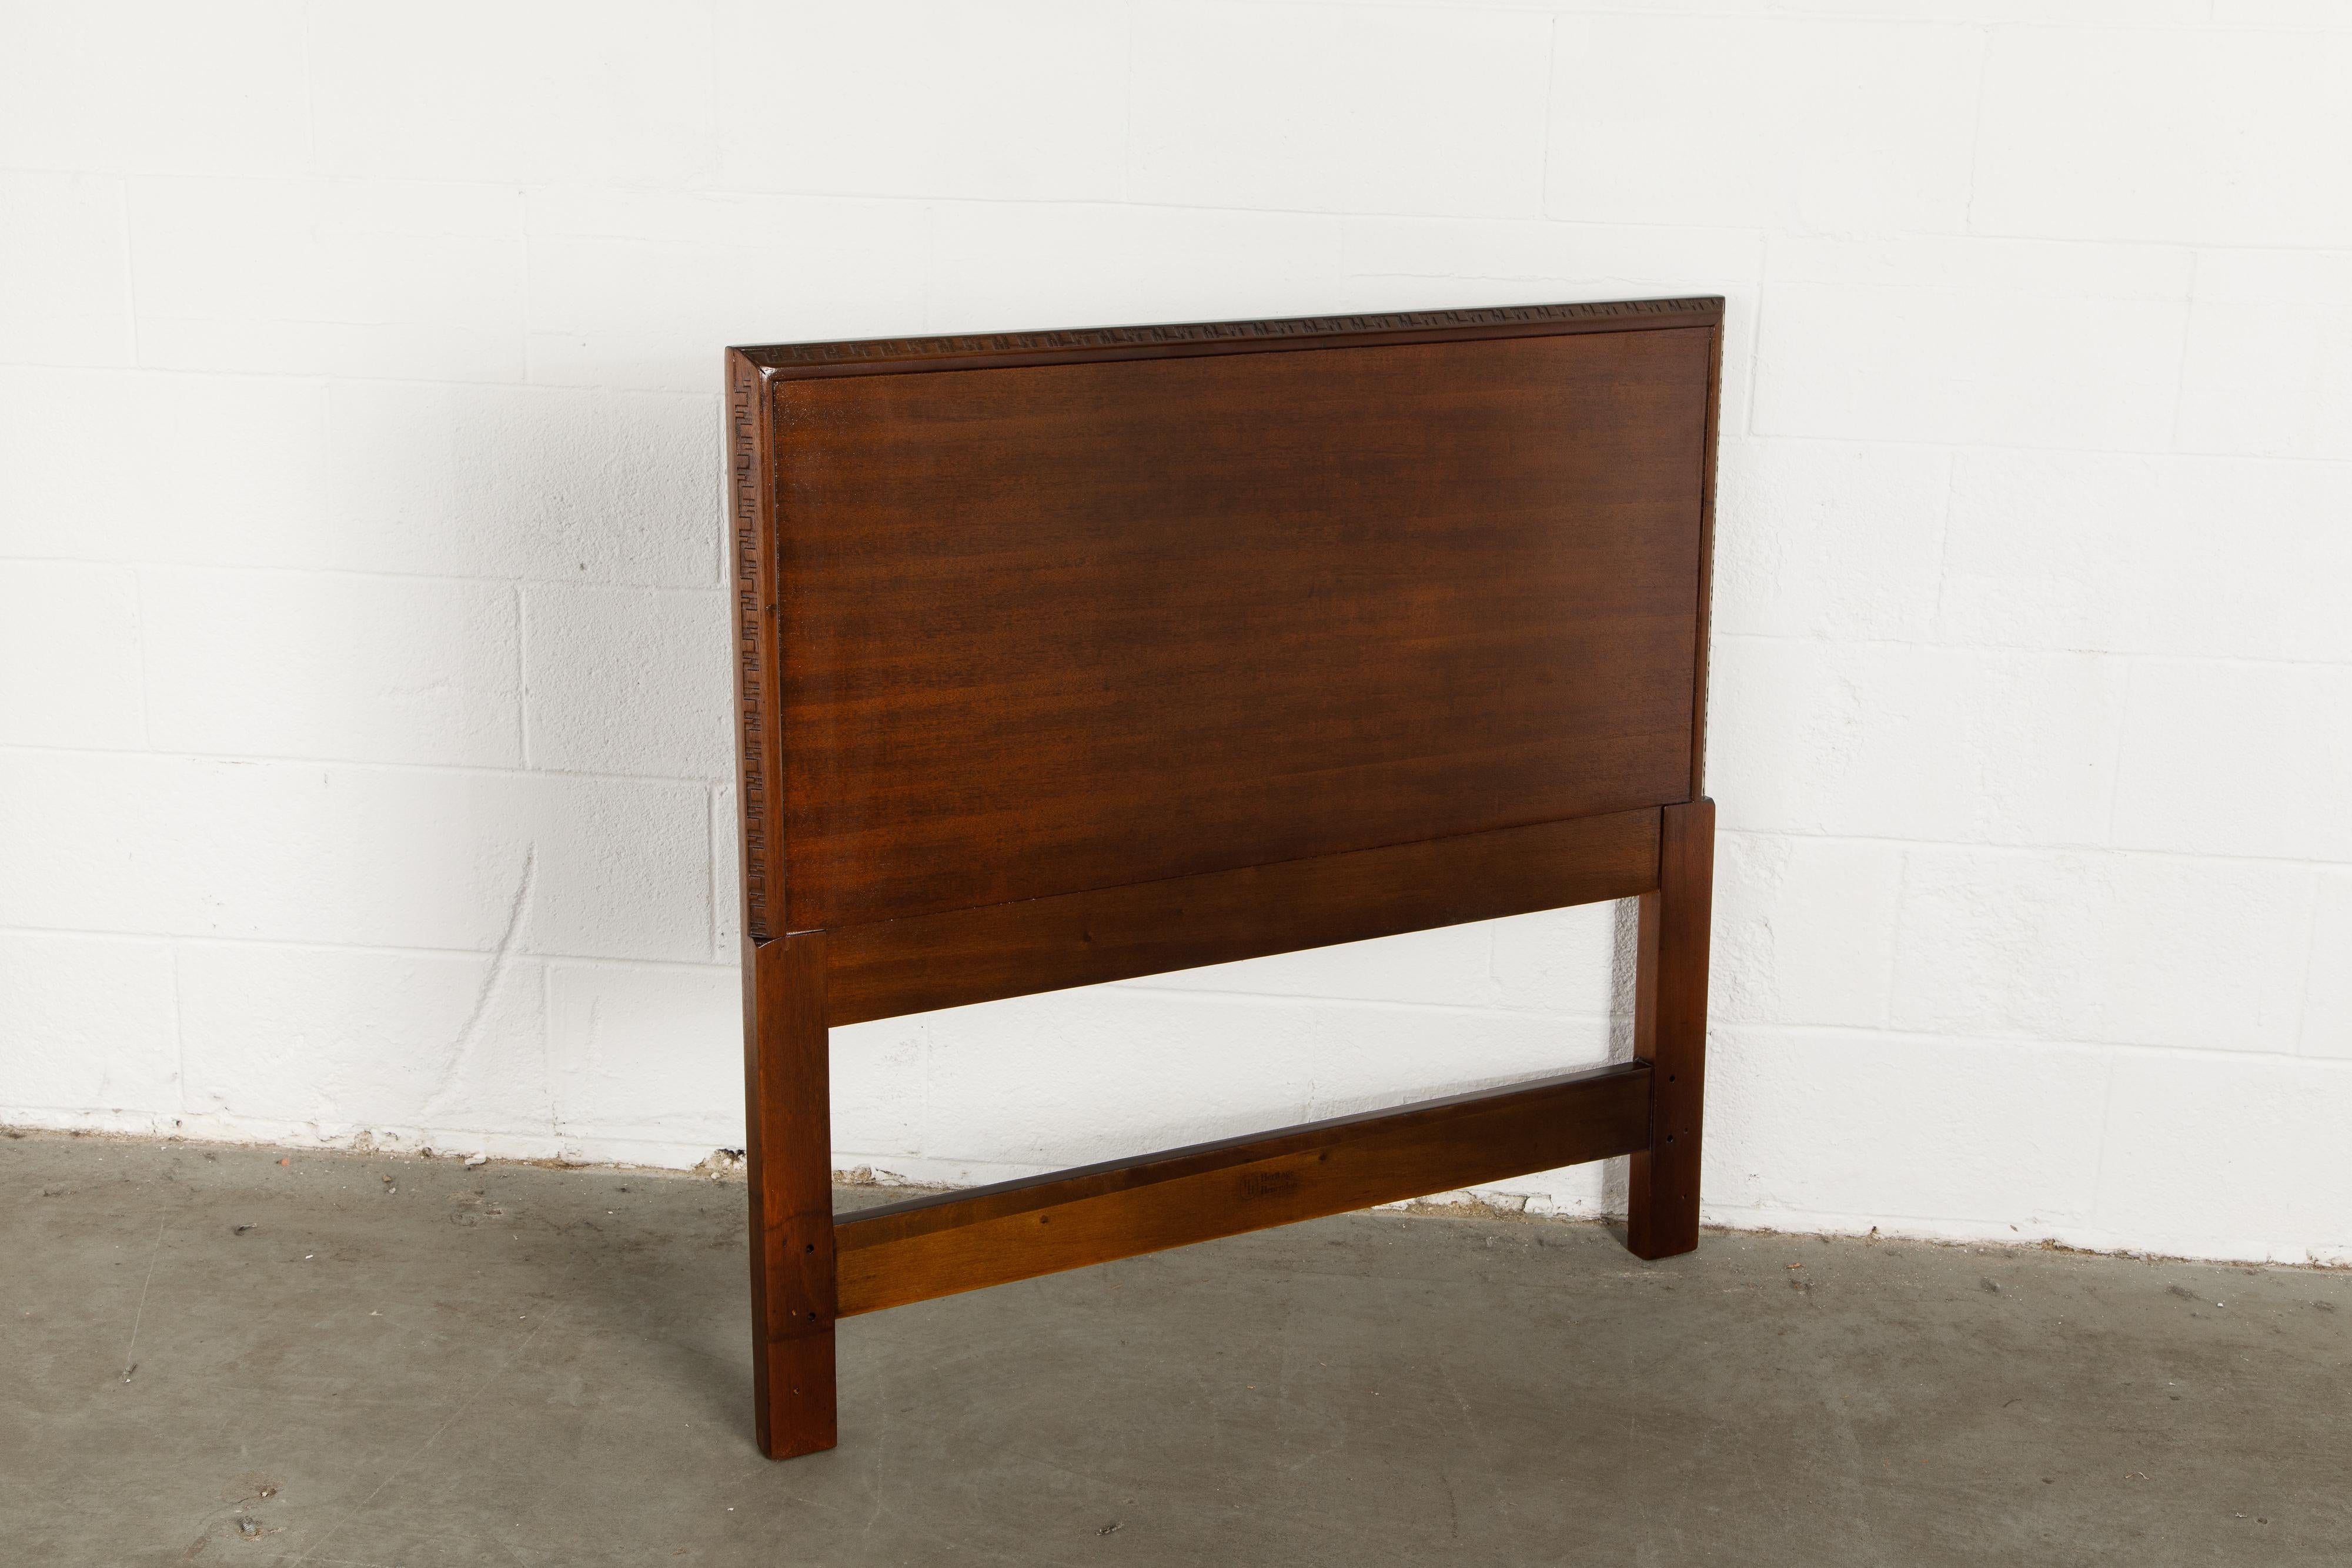 Mid-20th Century 'Taliesin' Mahogany Twin Sized Bed Headboard by Frank Lloyd Wright, 1955, Signed For Sale